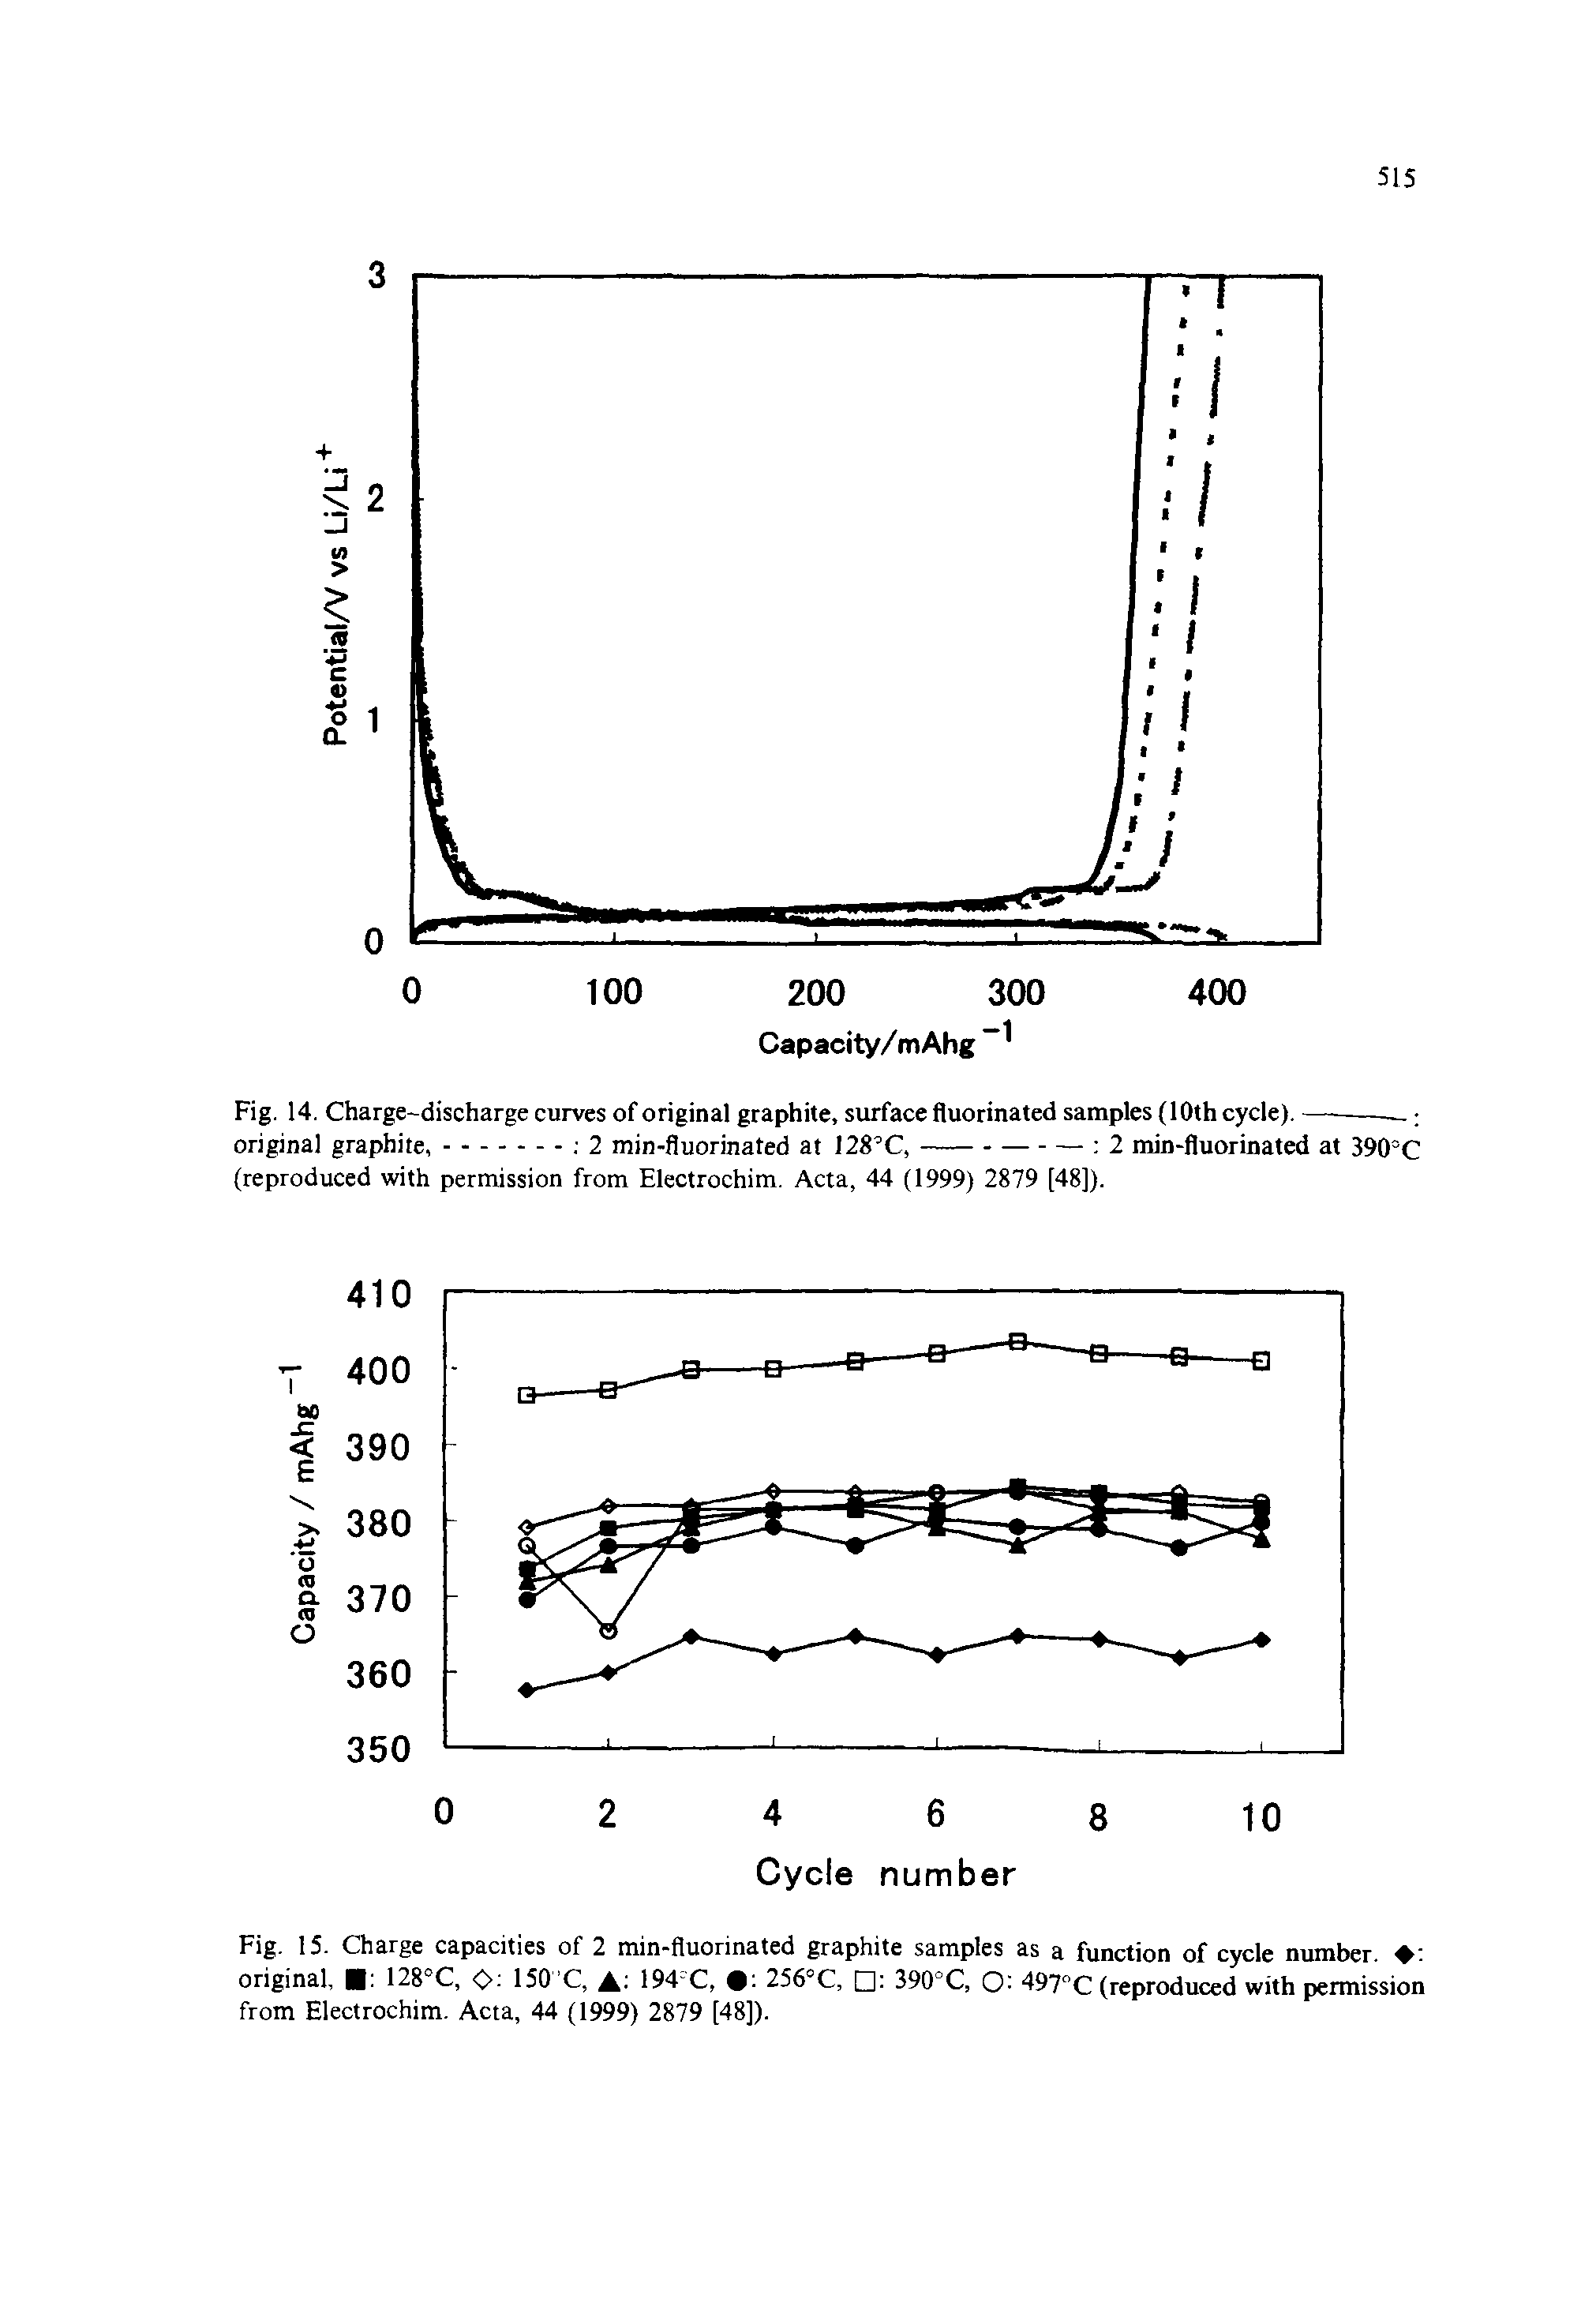 Fig. 15. Charge capacities of 2 min-fluorinated graphite samples as a function of cycle number. original, 128°C, <0> 150 C, A 194 C, 9 256°C, 390°C, C 497 C (reproduced with permission from Electrochim. Acta, 44 (1999) 2879 [48]).